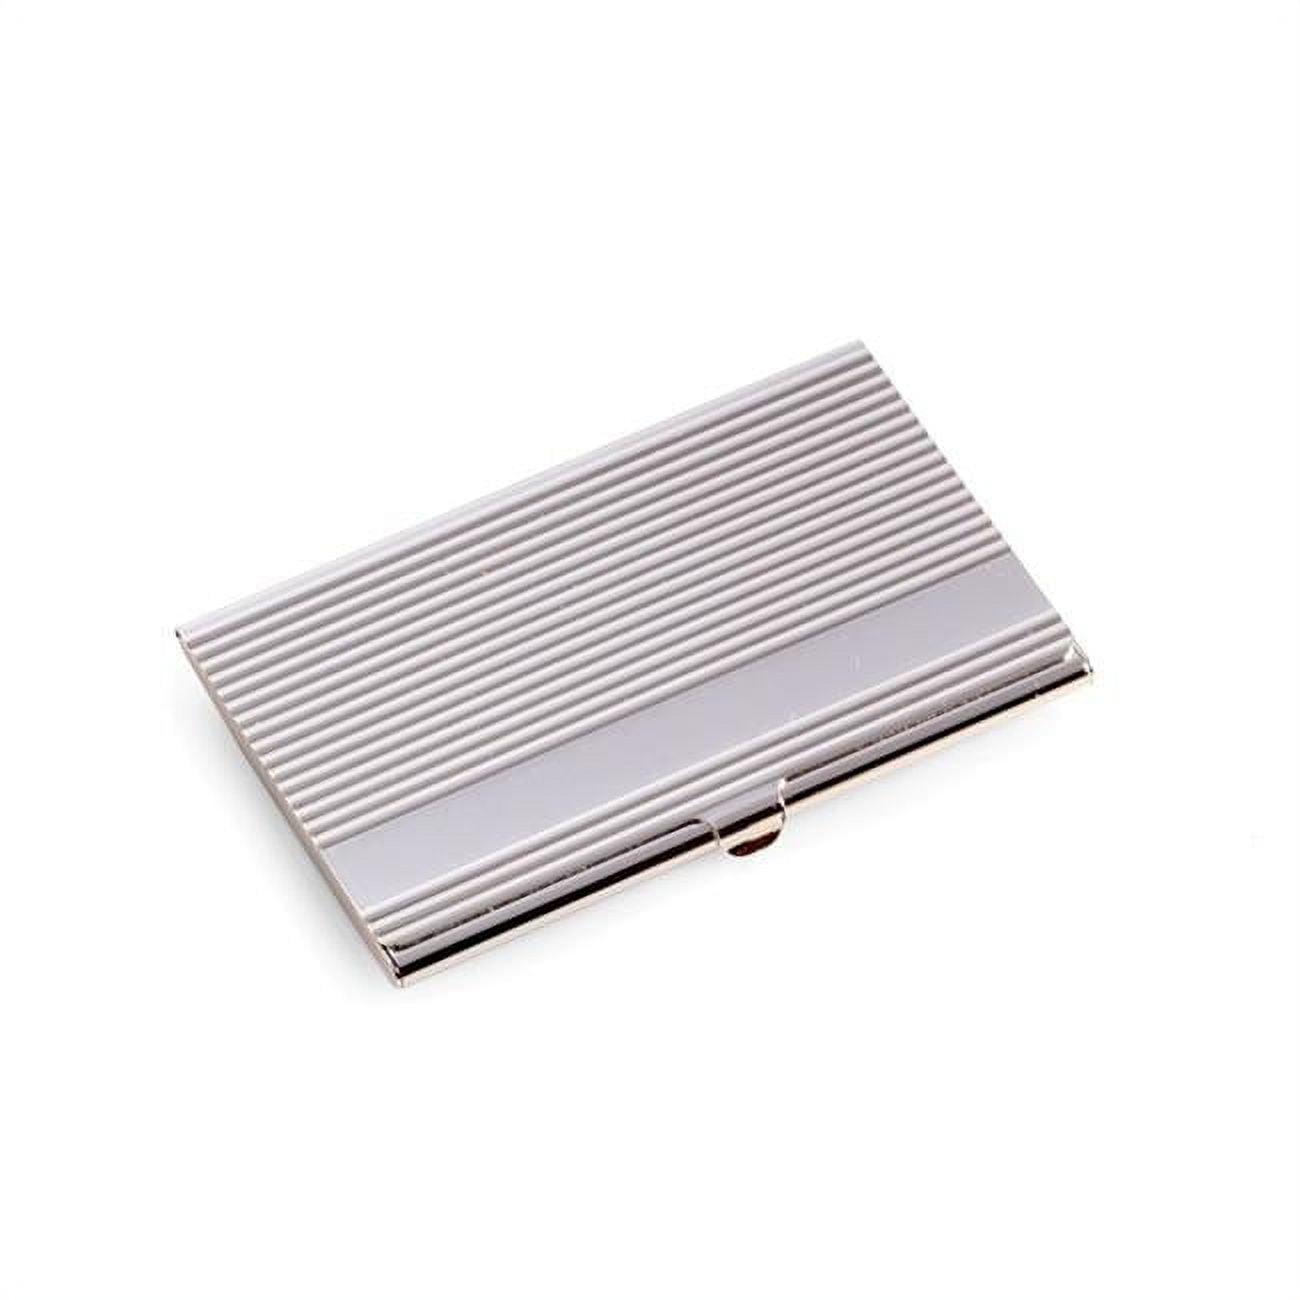 Bey-berk International D261 Silver Plated Business Card Case With Lined Design